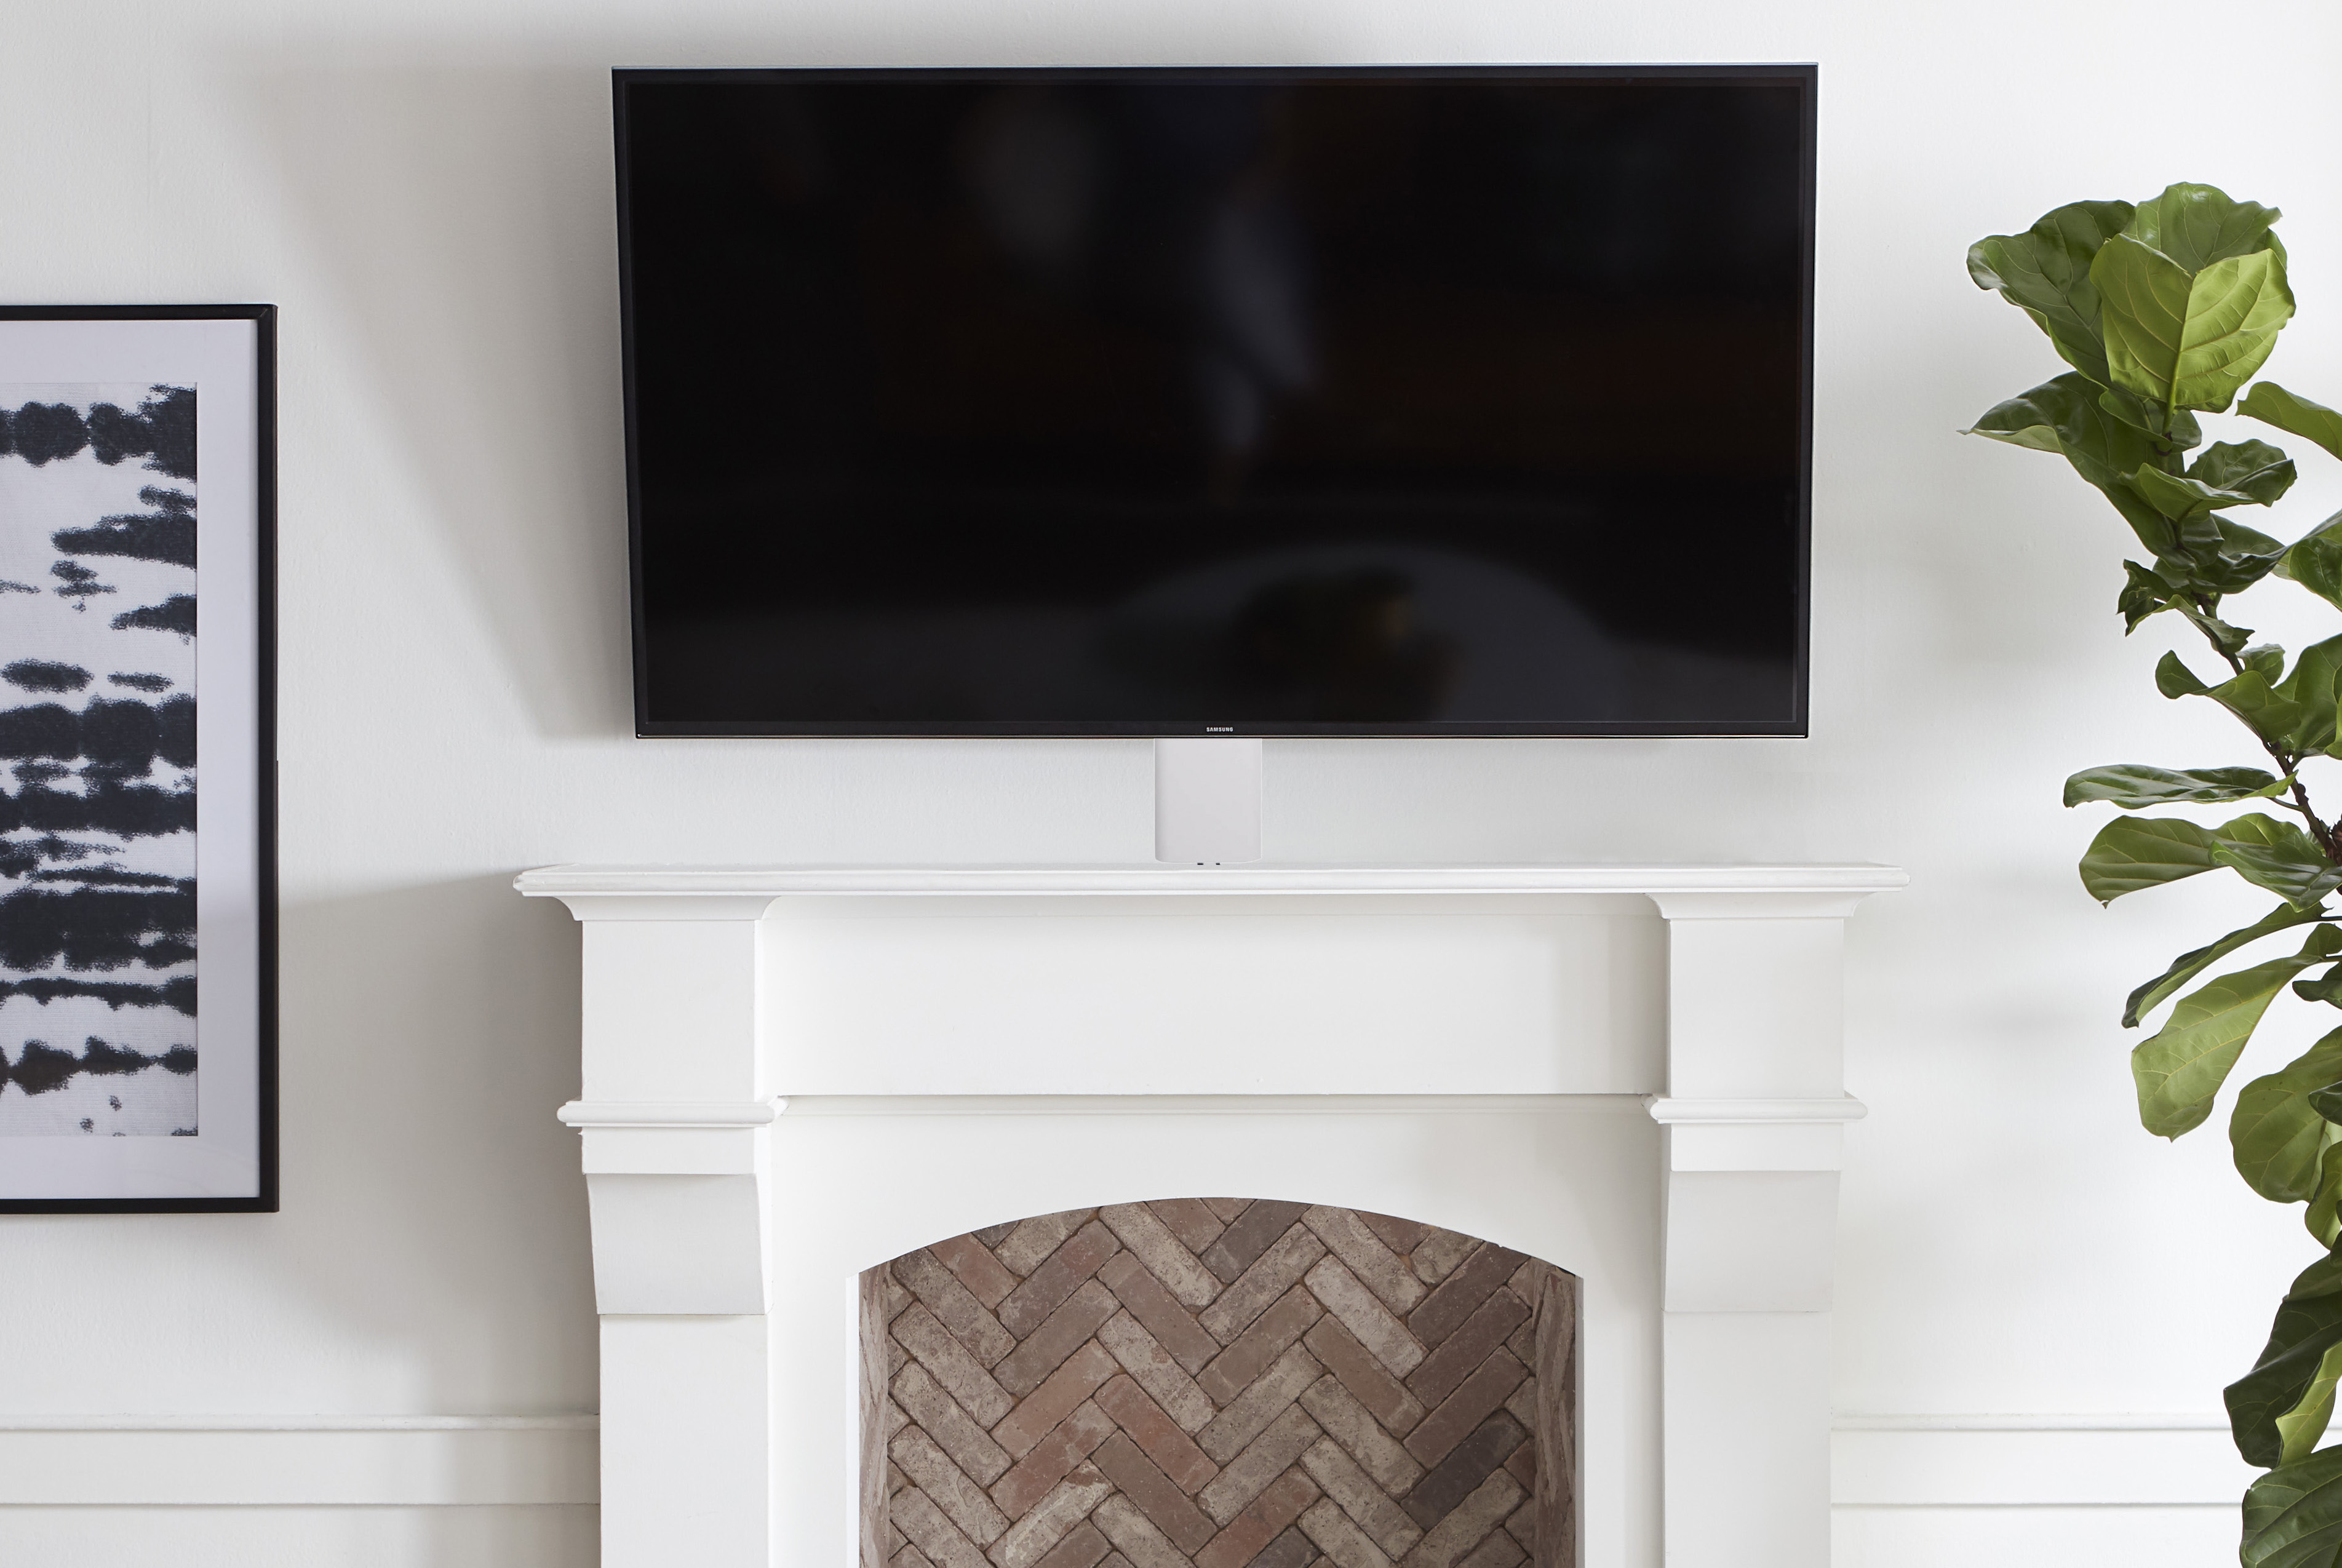 Mounting A Tv Over Fireplace How, How To Mount A Flat Screen Tv Over Fireplace And Hide The Wires